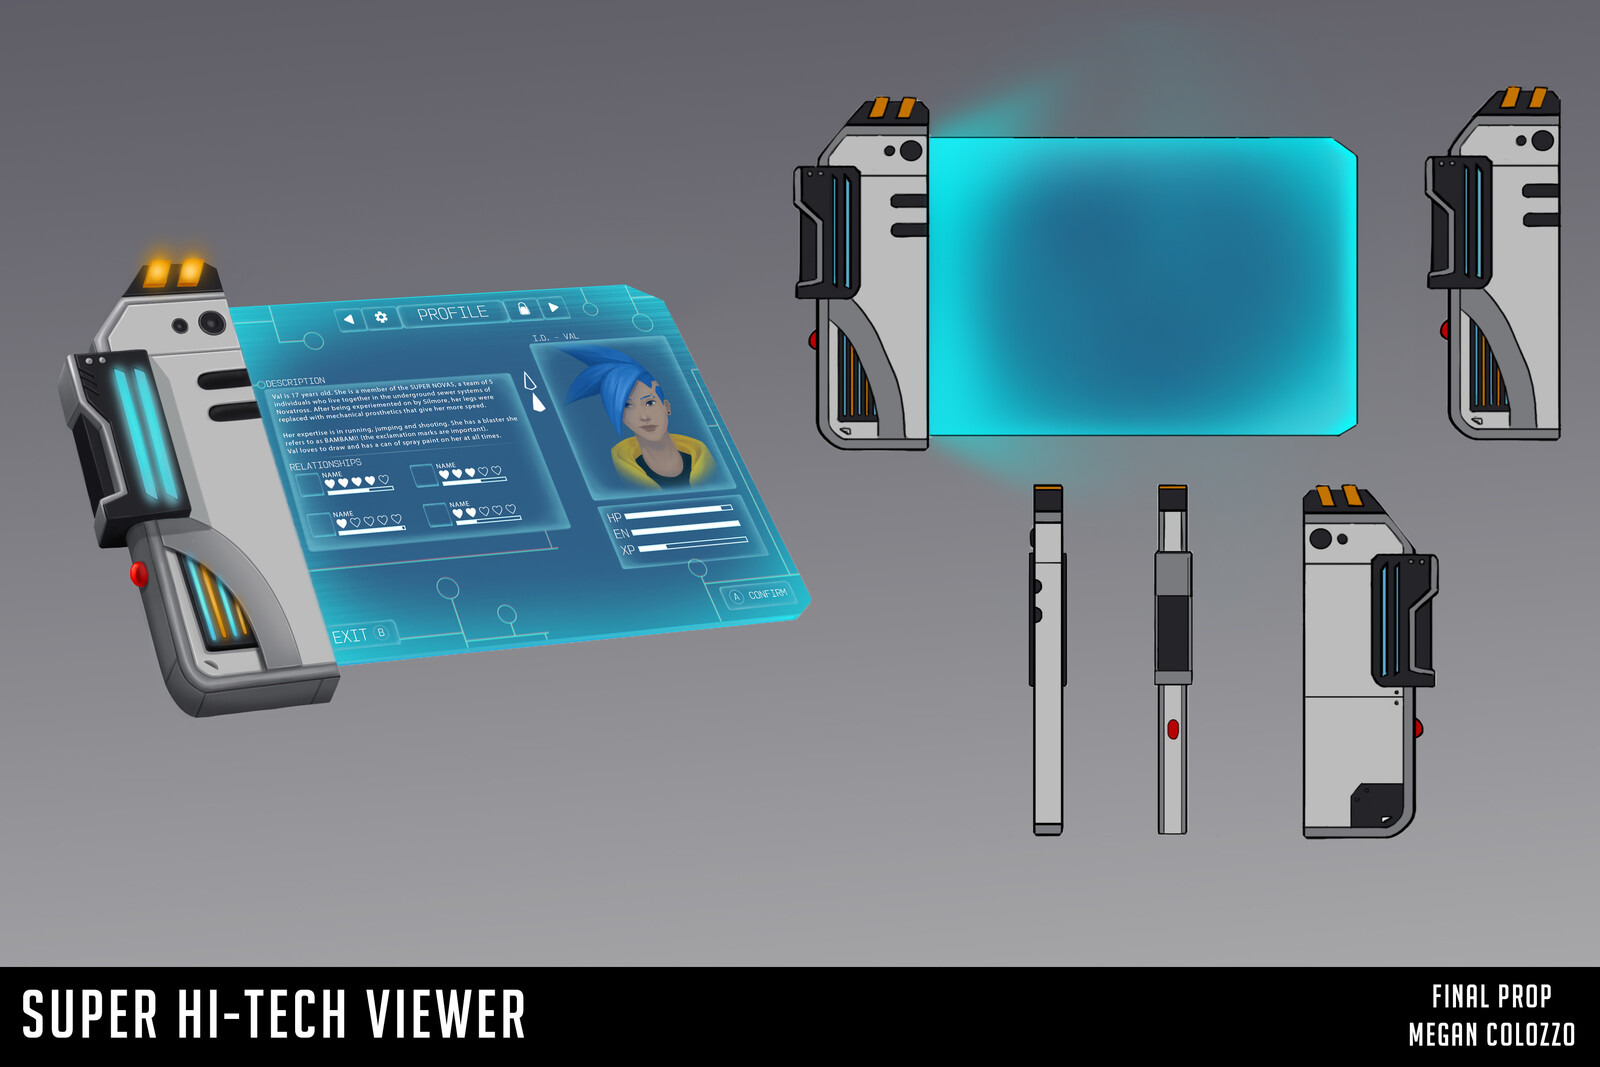 Super Hi-Tech Viewing Device with Animated UI